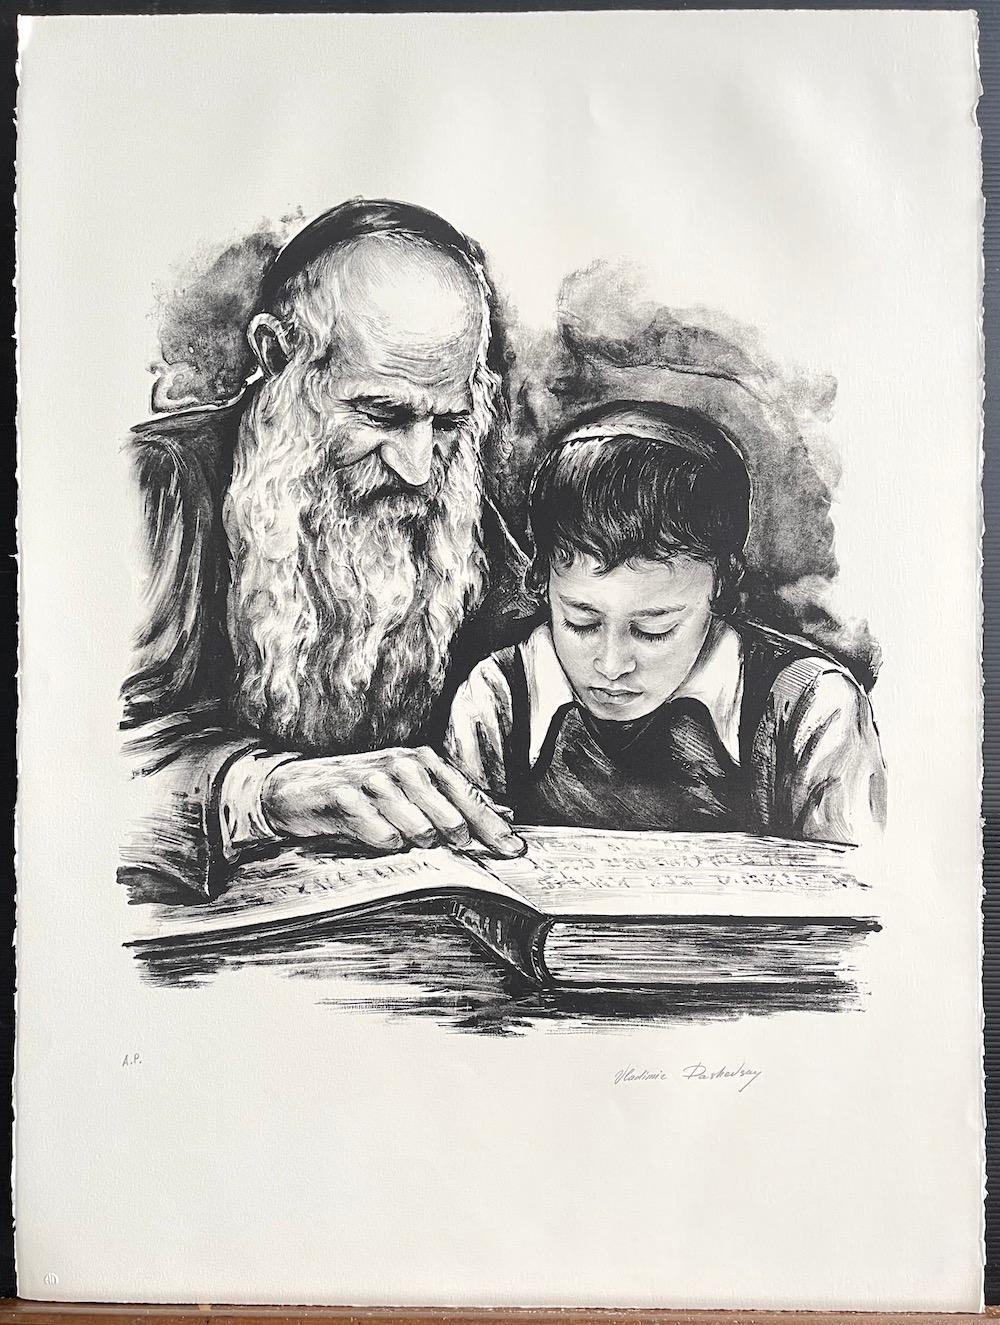 RABBI TEACHING is an original hand drawn, limited edition lithograph printed in black ink on archival Arches printmaking paper 100% acid free from a hand drawn lithography stone using traditional hand lithography techniques, not a photo reproduction